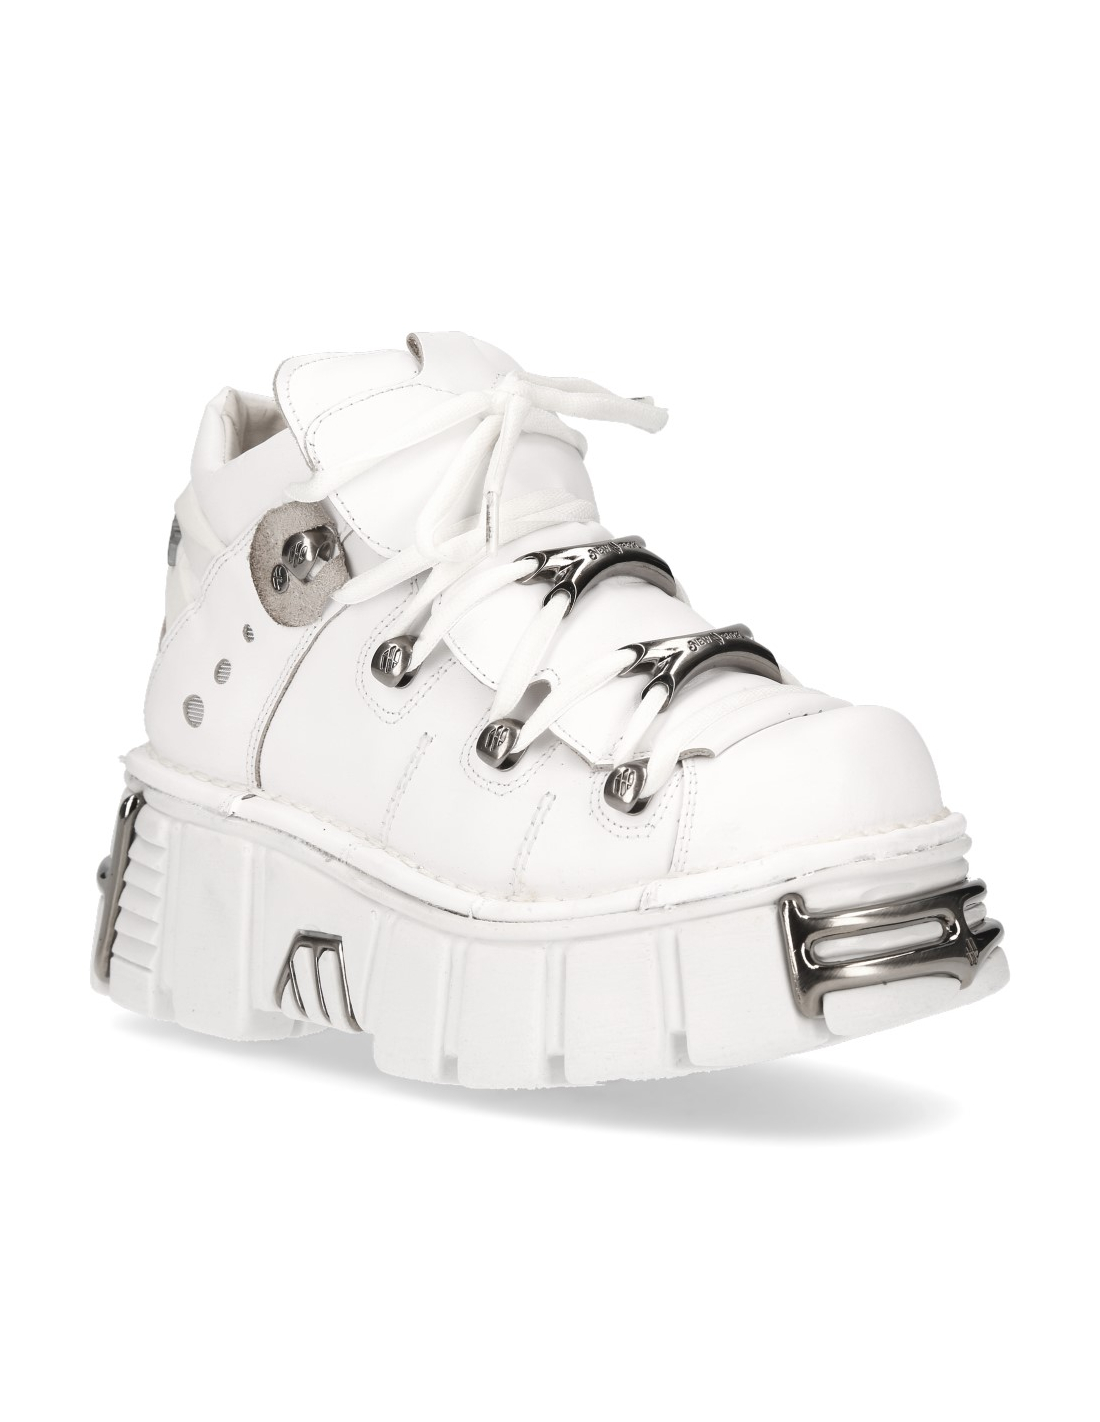 ANKLE BOOT WHITE TOWER WITH LACES M-106N-S18